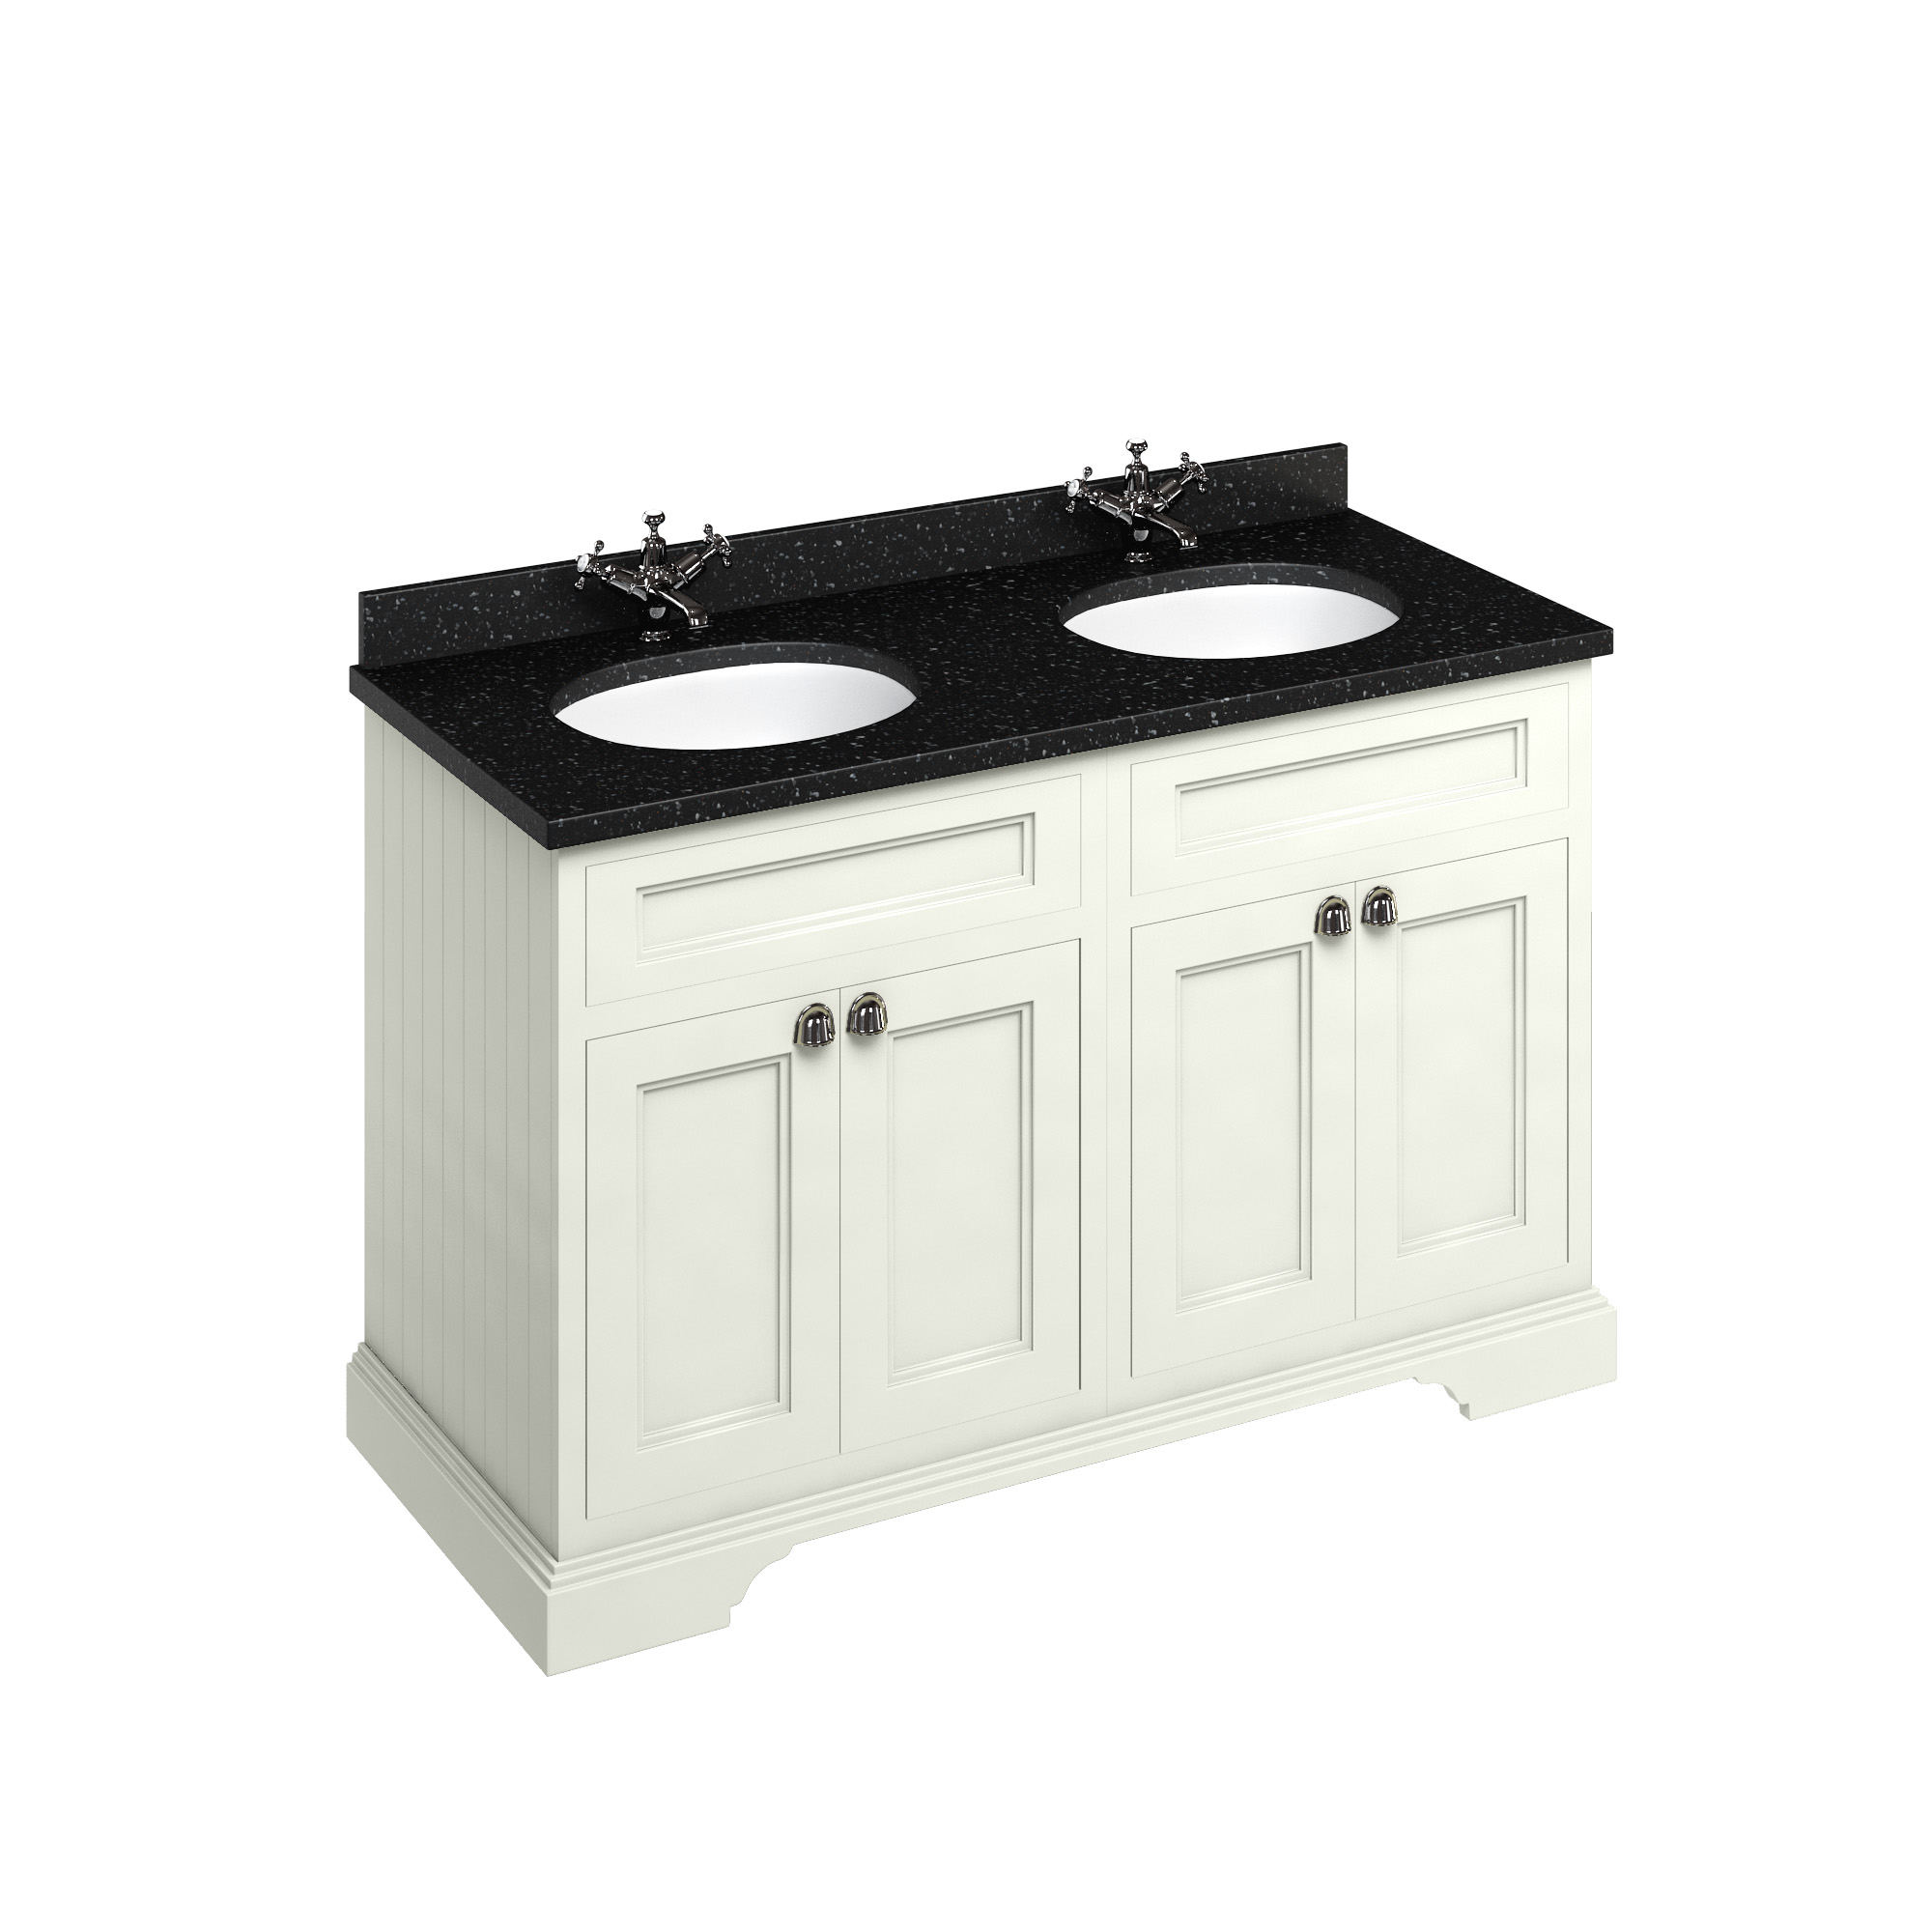 Freestanding 130 Vanity Unit with doors - Sand and Minerva black granite worktop with two integrated white basins